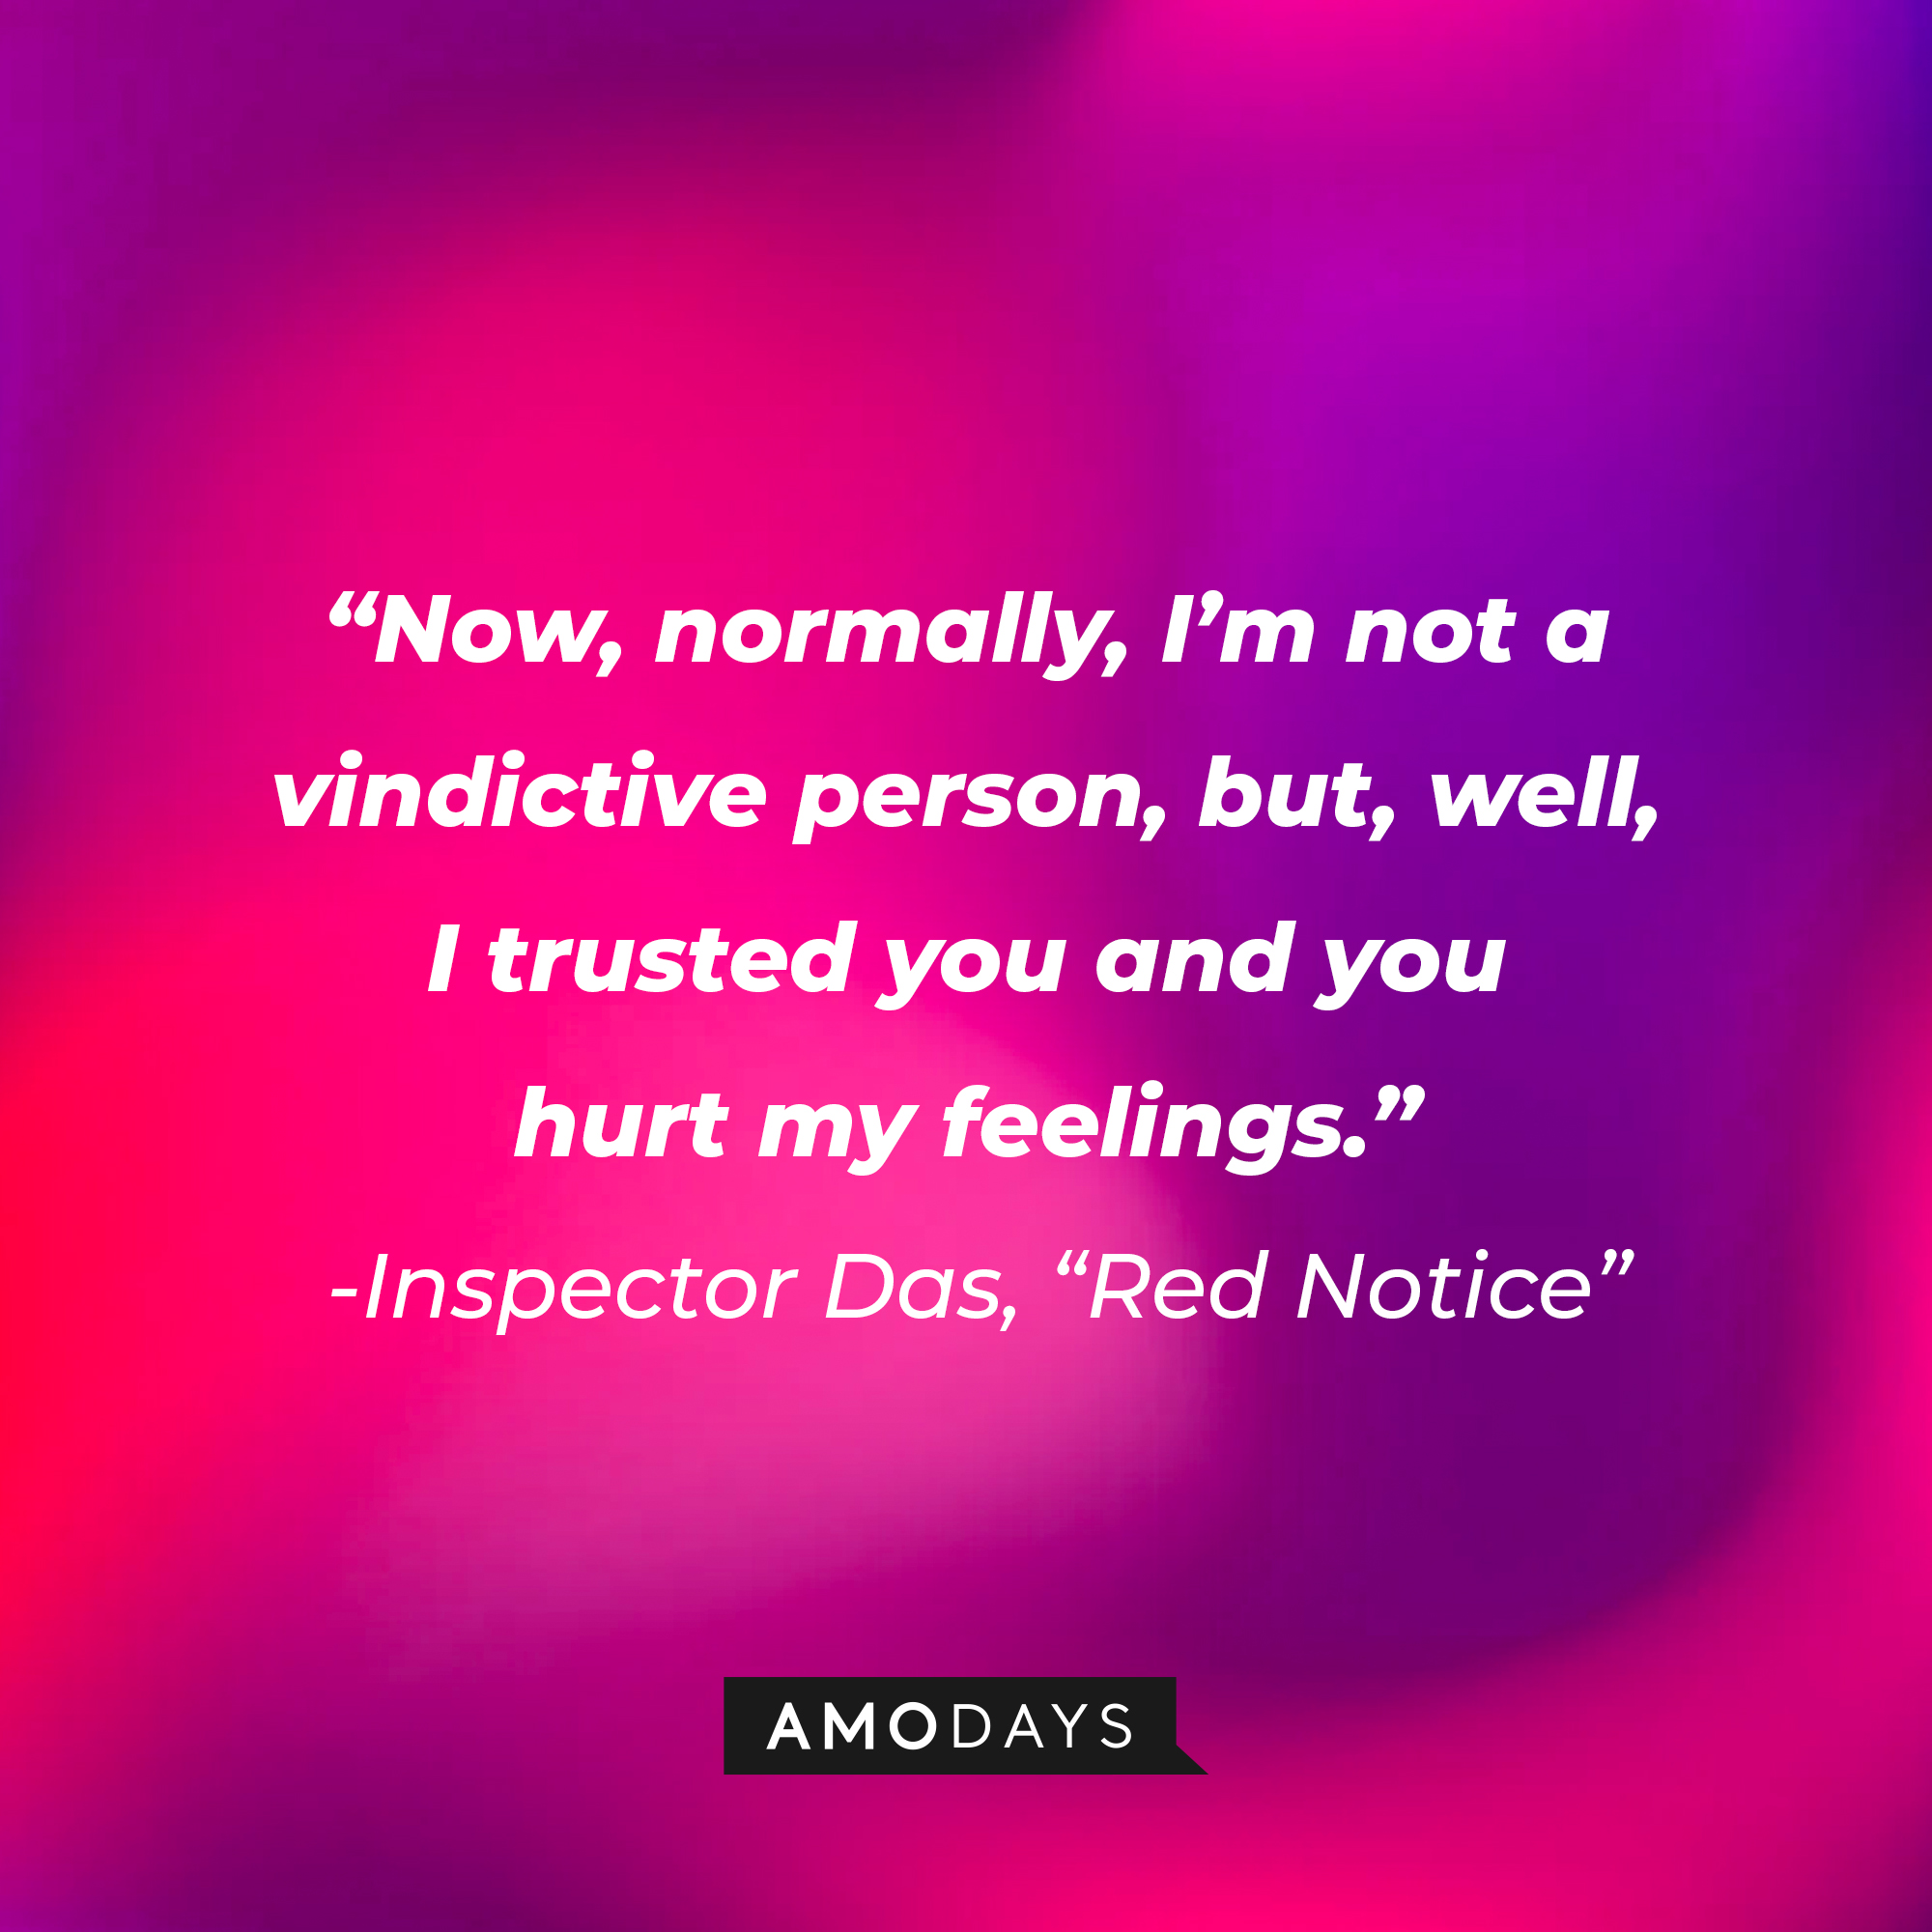 Inspector Das' quote from "Red Notice:" “Now, normally, I’m not a vindictive person, but, well, I trusted you and you hurt my feelings.” | Source: AmoDays